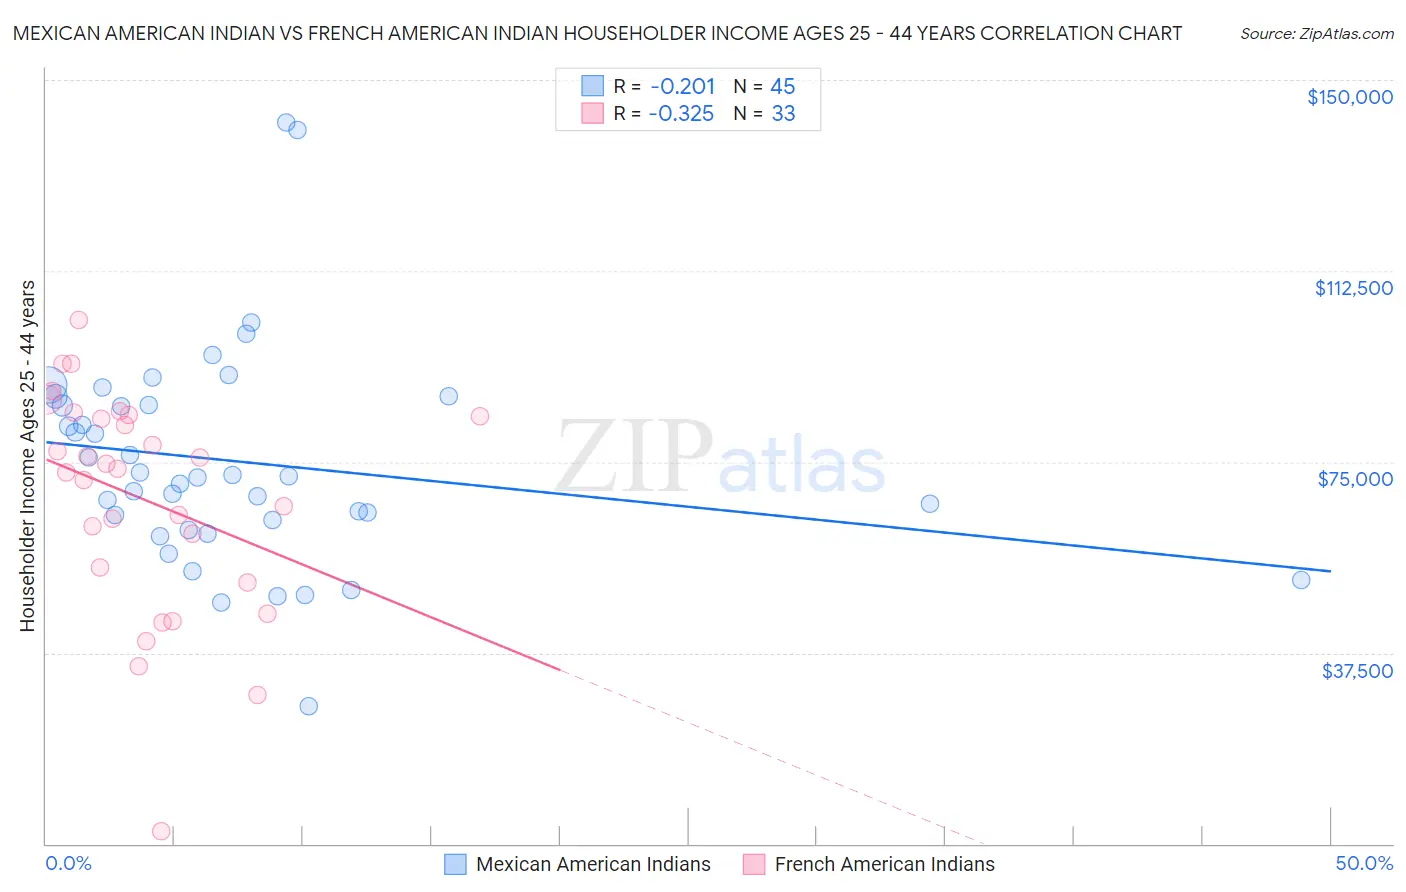 Mexican American Indian vs French American Indian Householder Income Ages 25 - 44 years